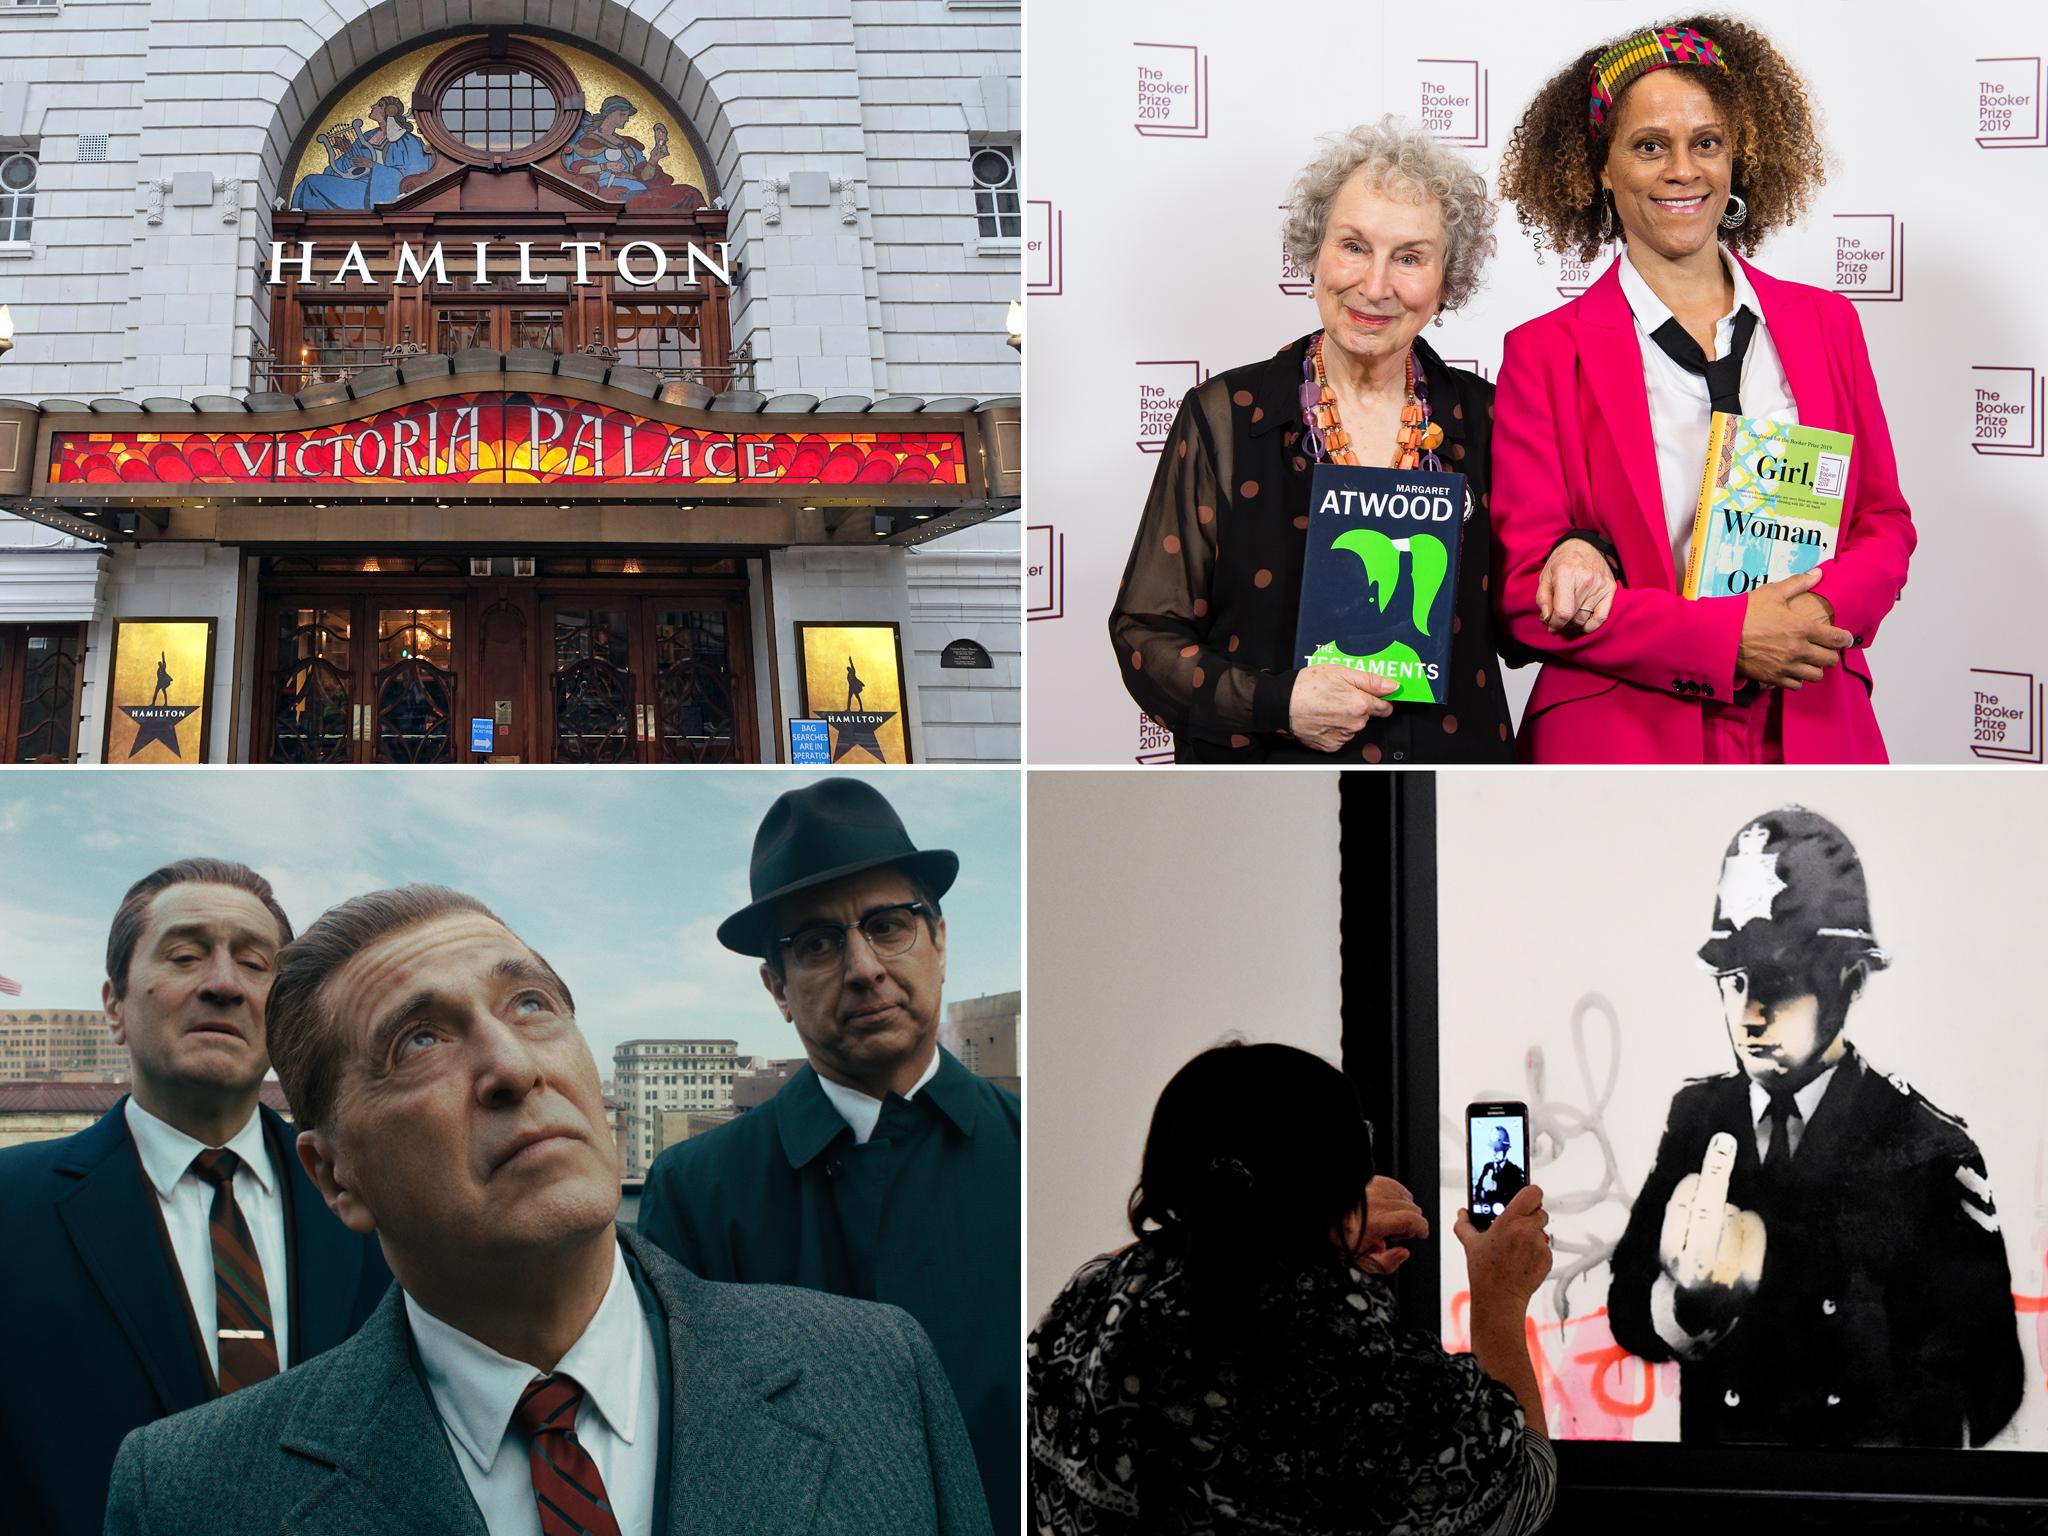 In the firing line are (clockwise, from top left) exorbitant theatre prices, dithering literary prize judges, overcrowded galleries and interminable movies